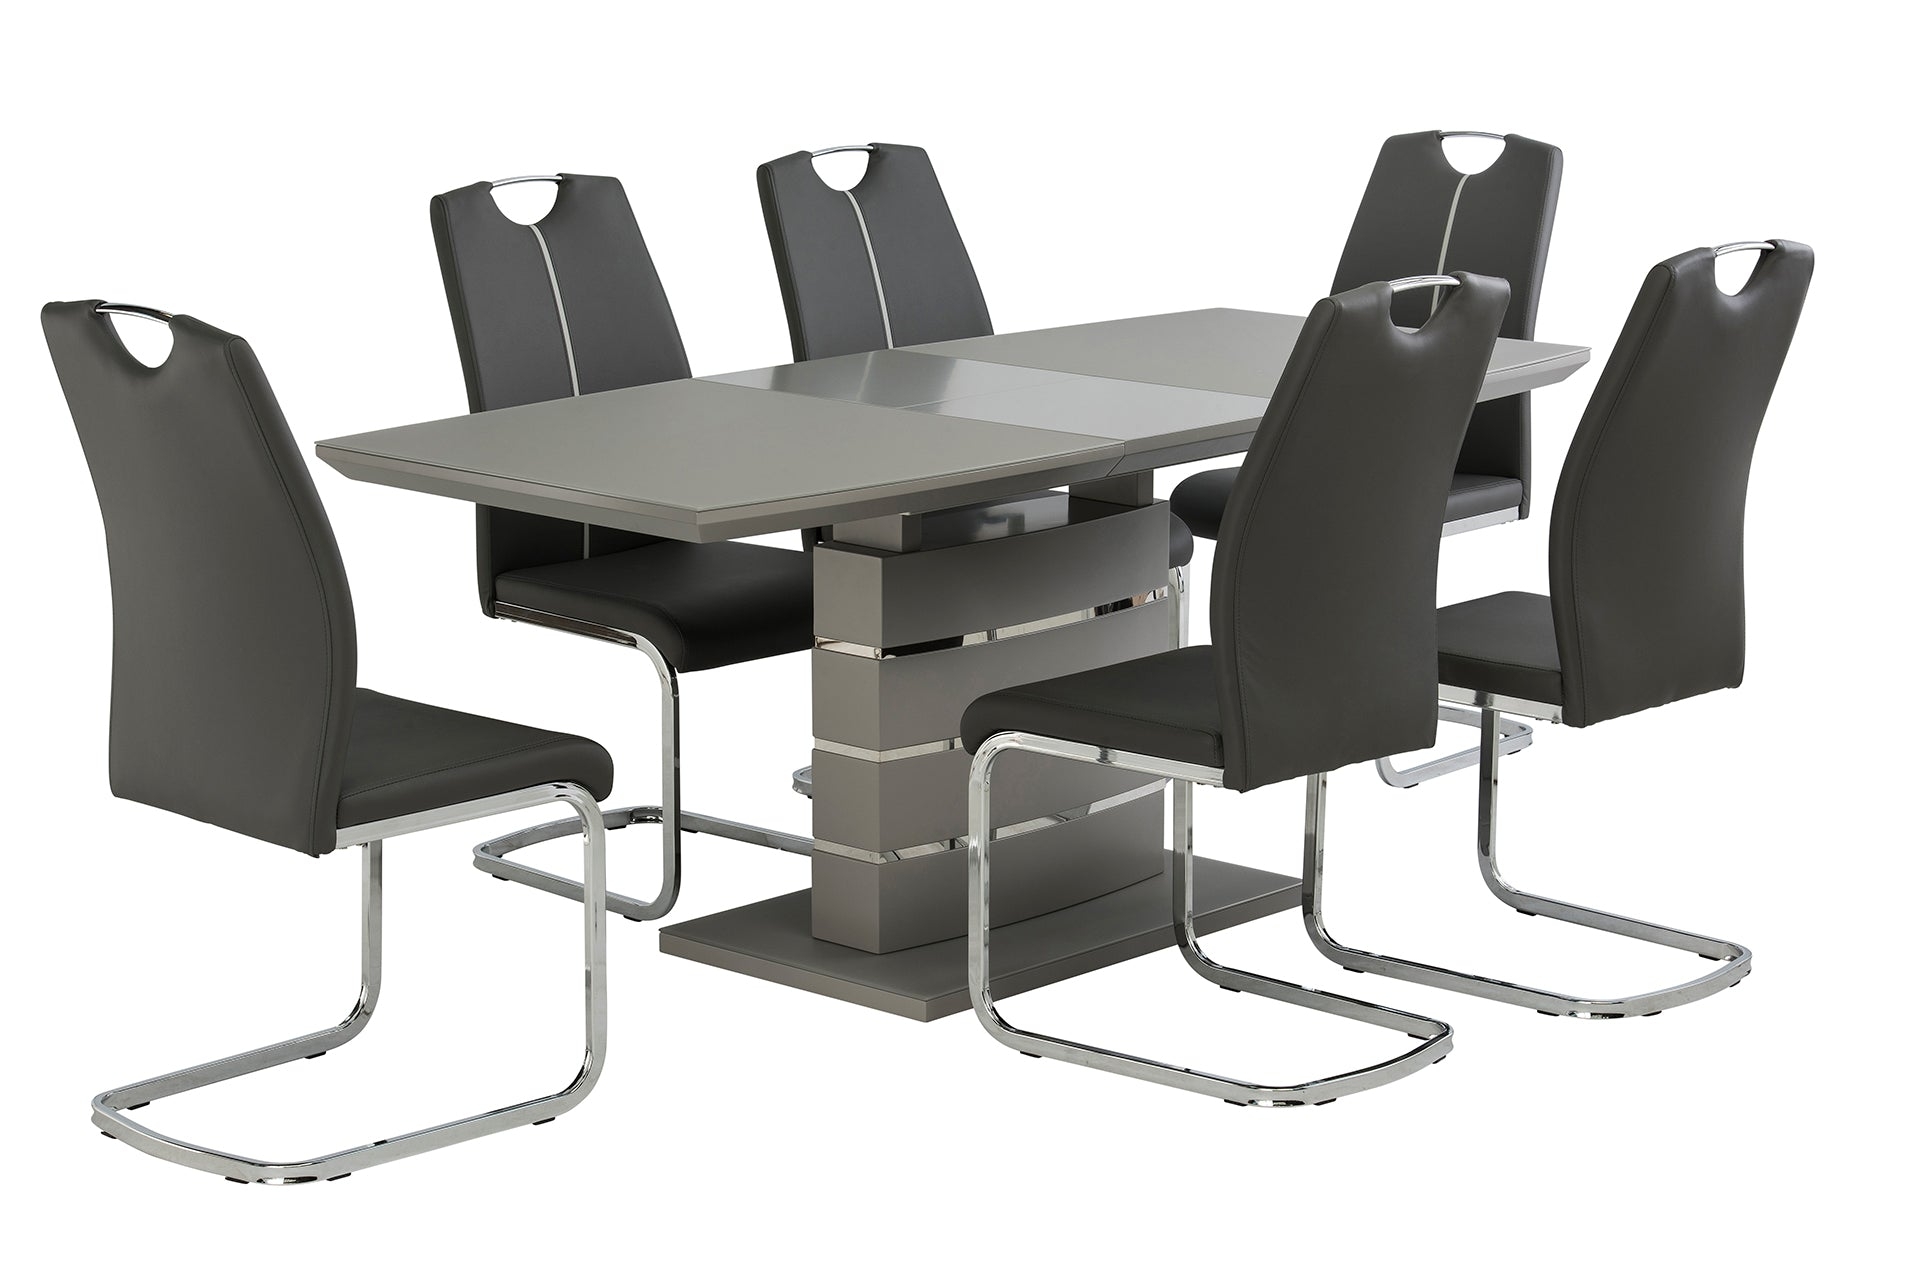 Argentina Grey Extendable Dining Table Set On Matt Finish Paint 6 Chairs, 1 Table 6 Chair Set